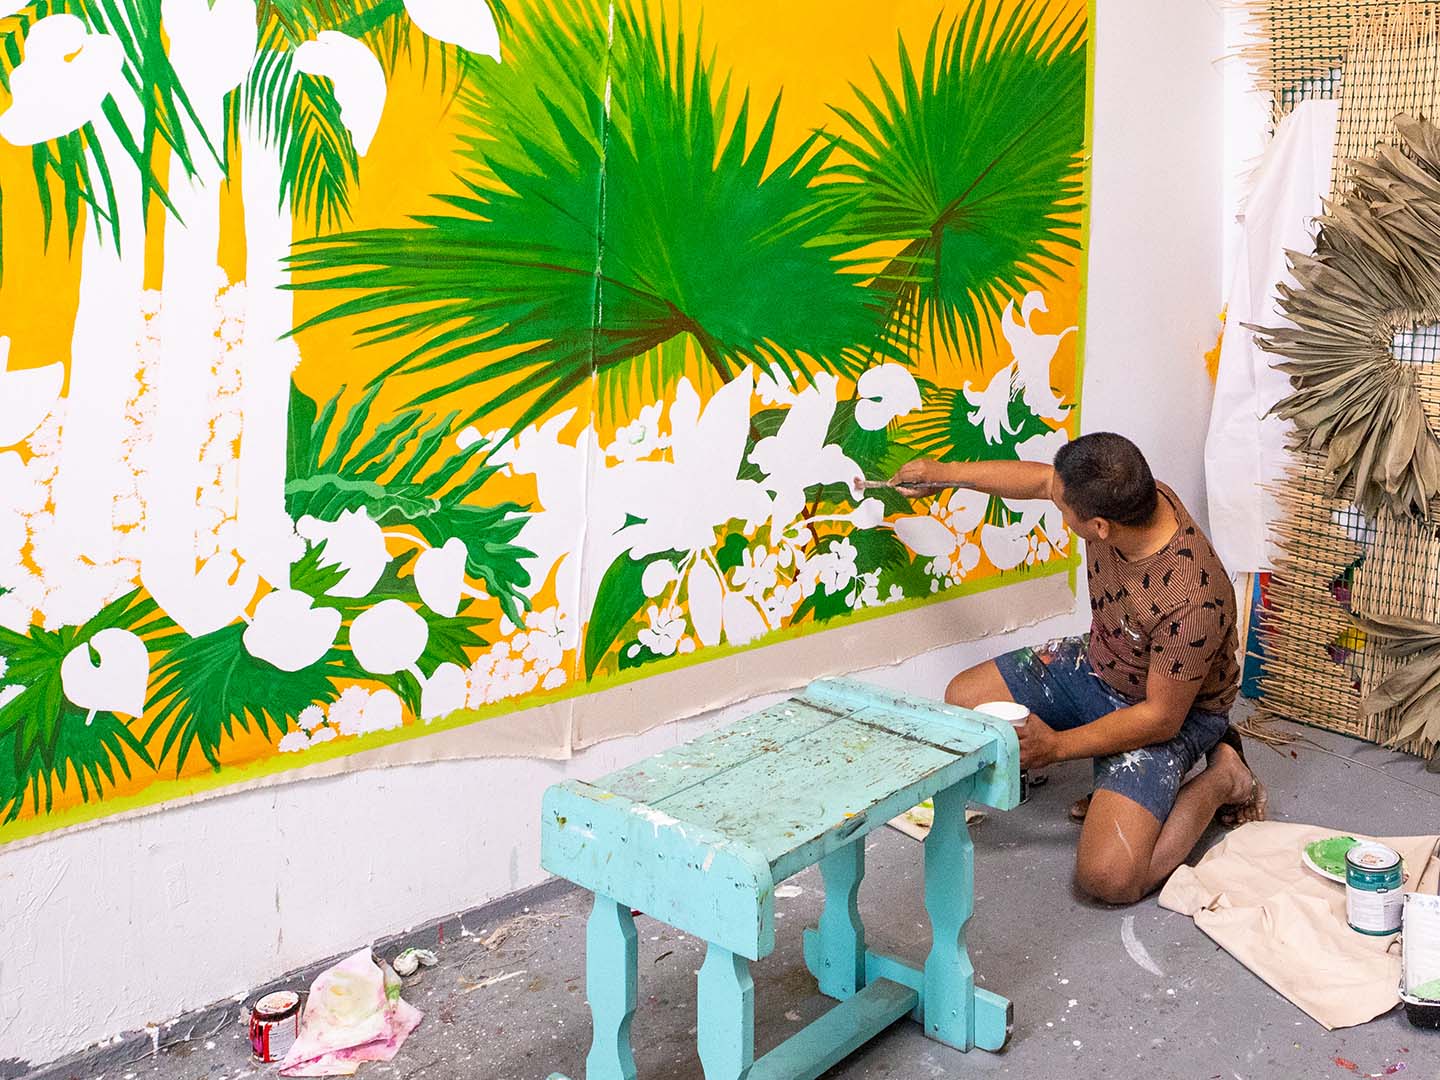 Student crouching and working on a large yellow and green painting in a painting studio.